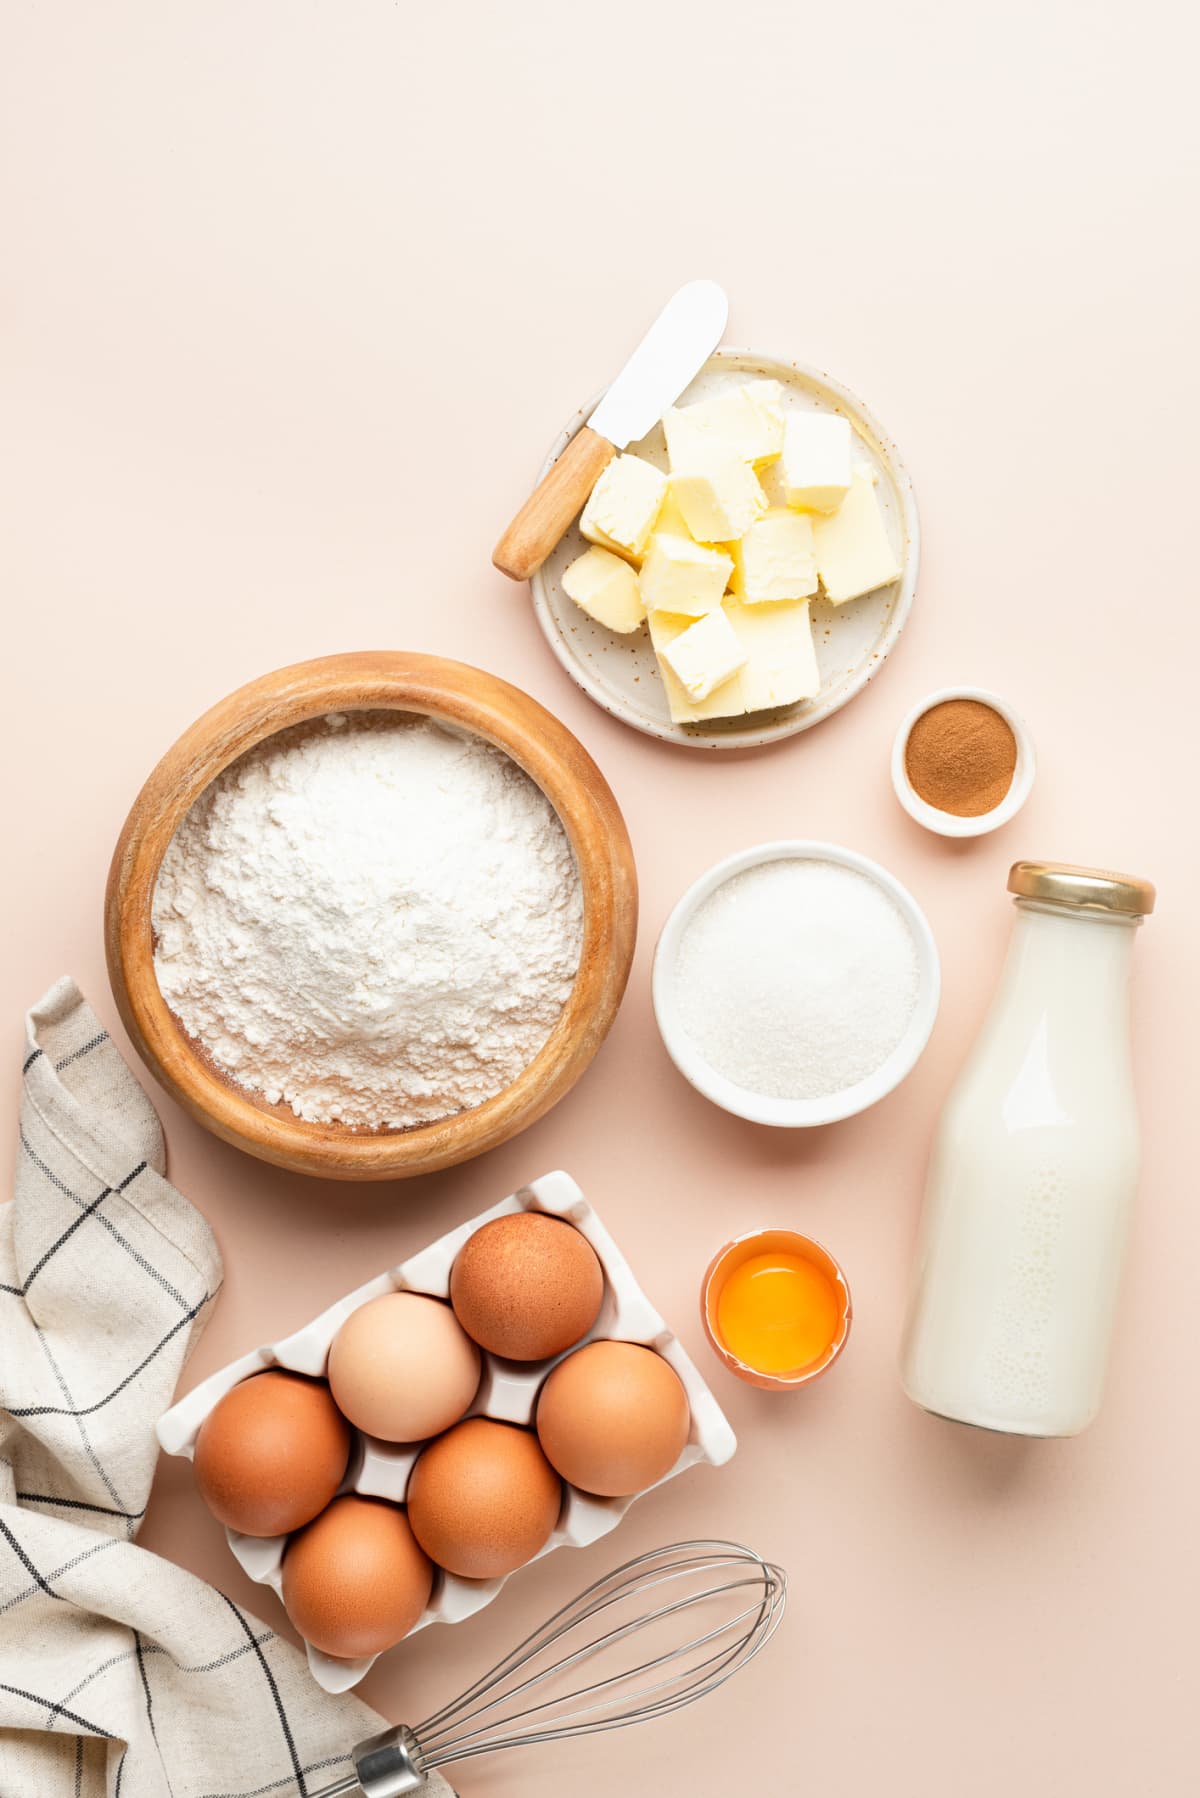 Baking ingredients for cakes, bread, cookies, or pastries on beige background